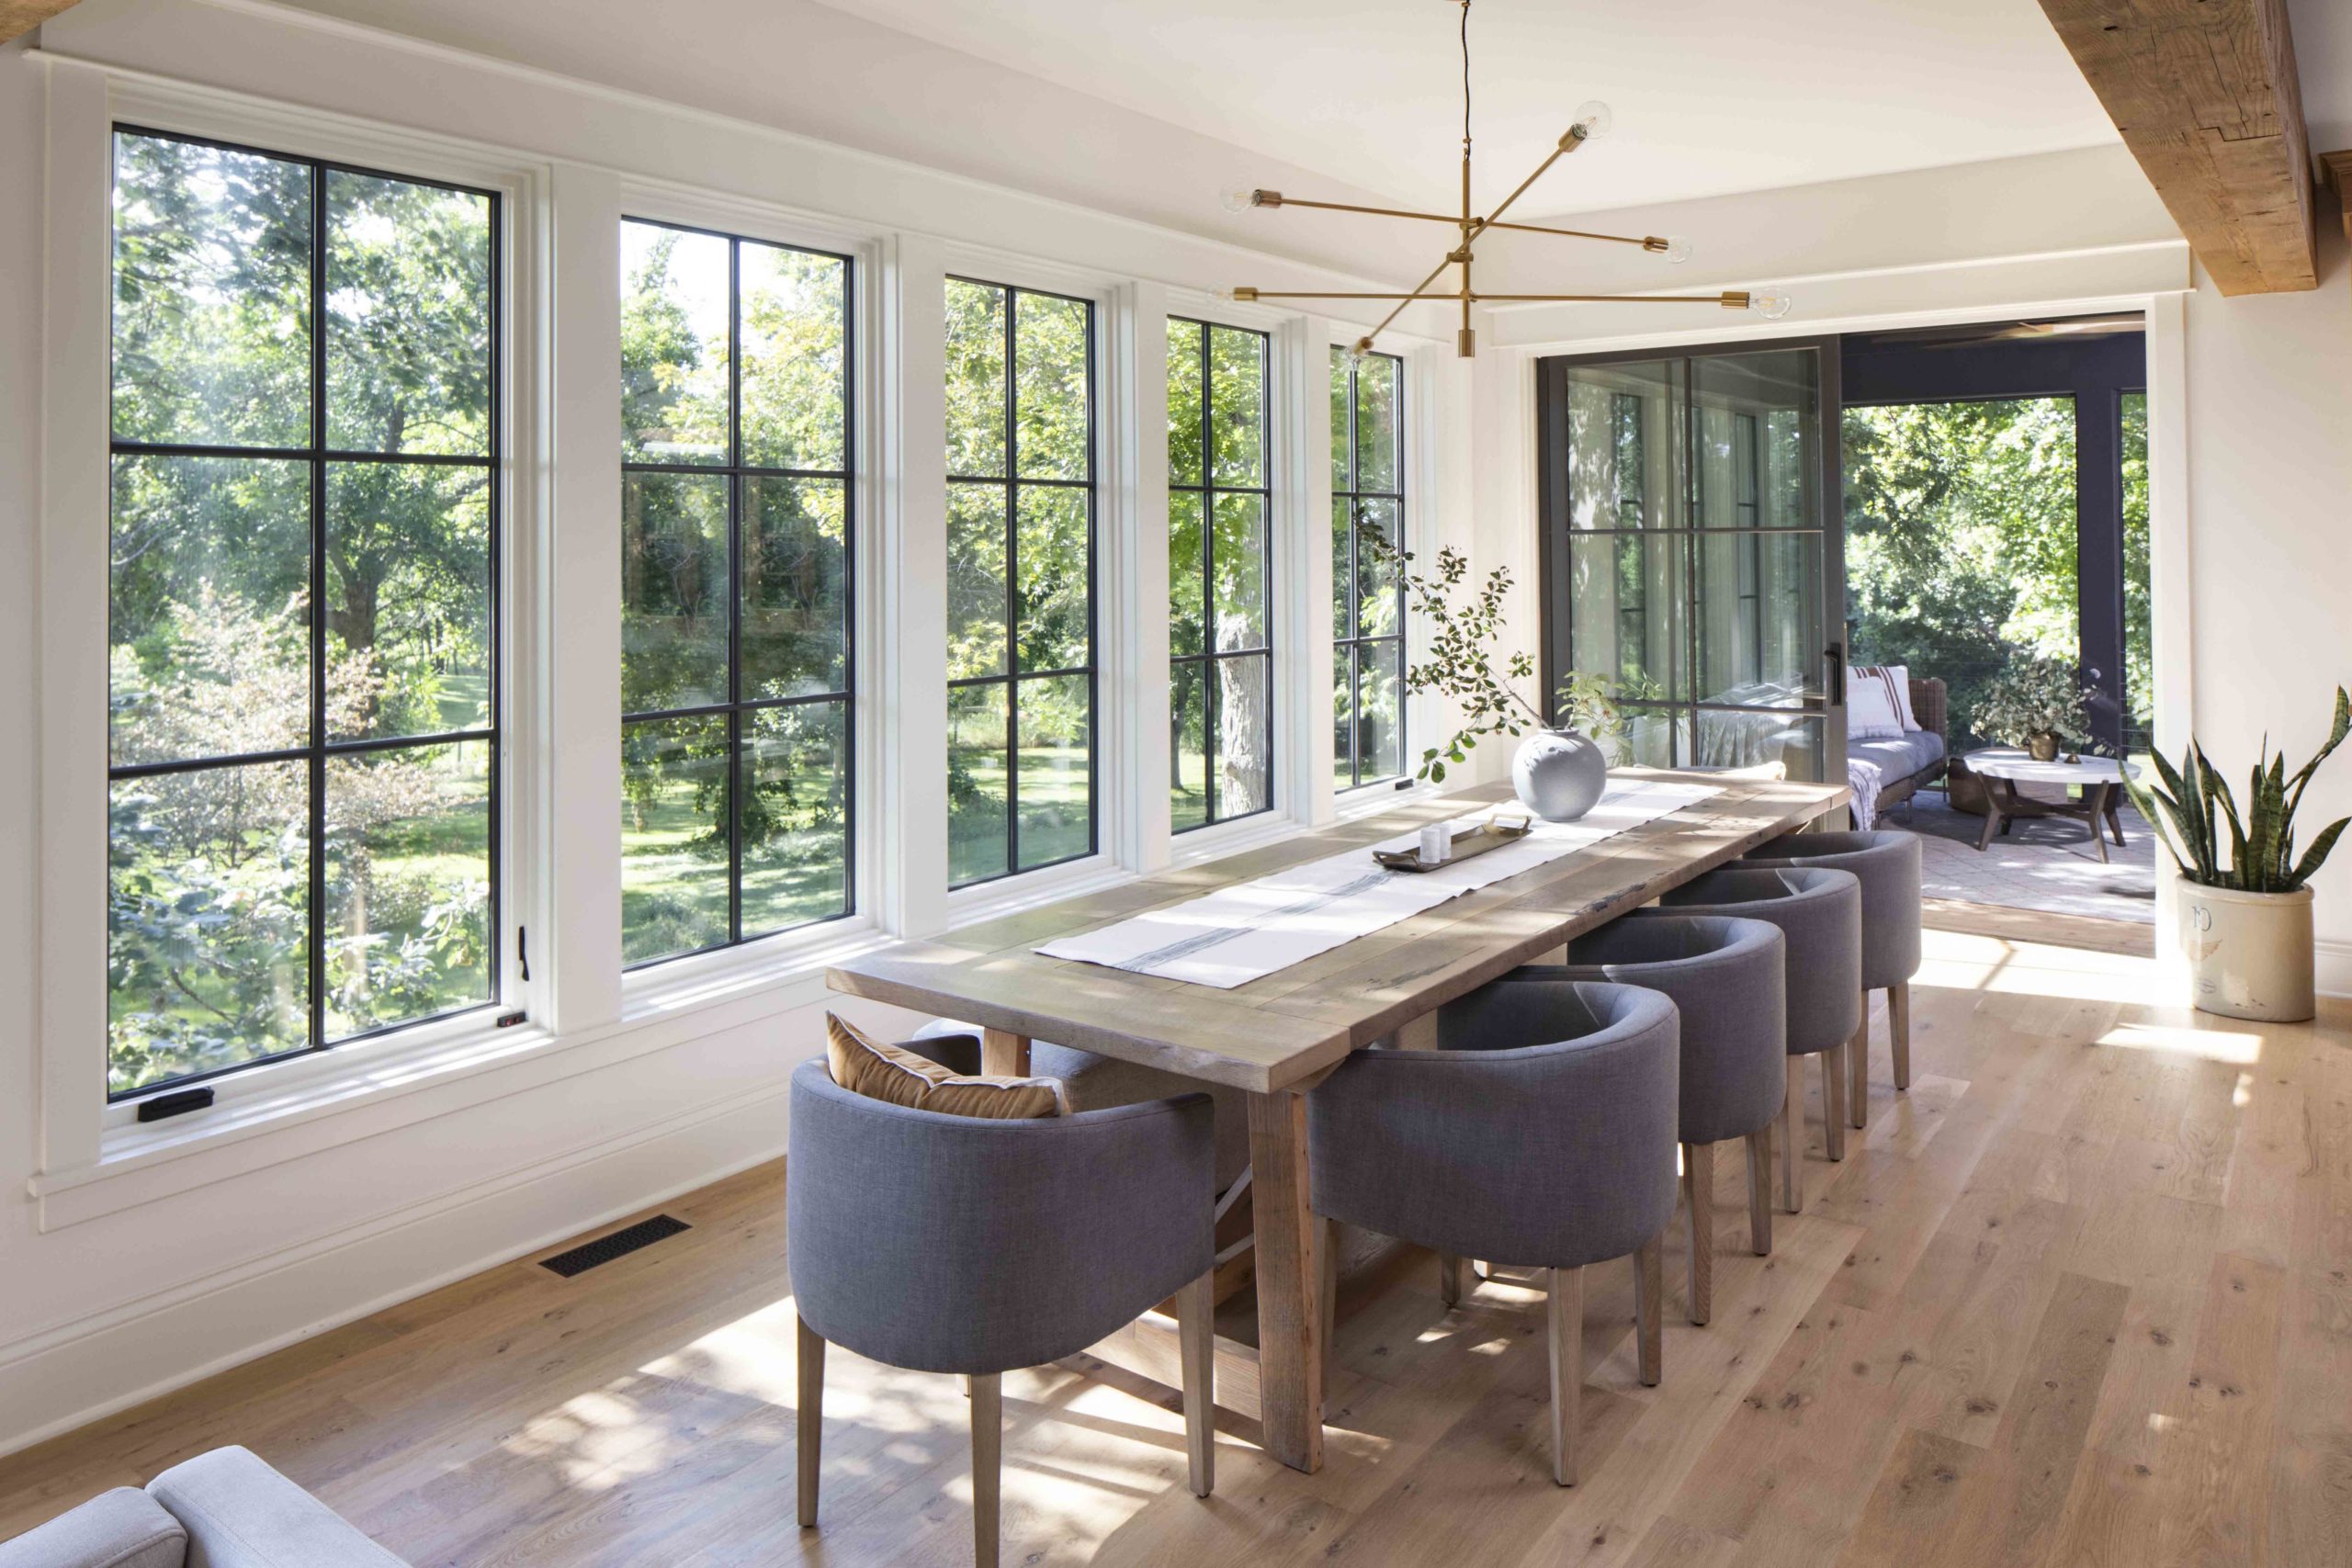 A prairie transitional custom home with large windows overlooking a wooded area.